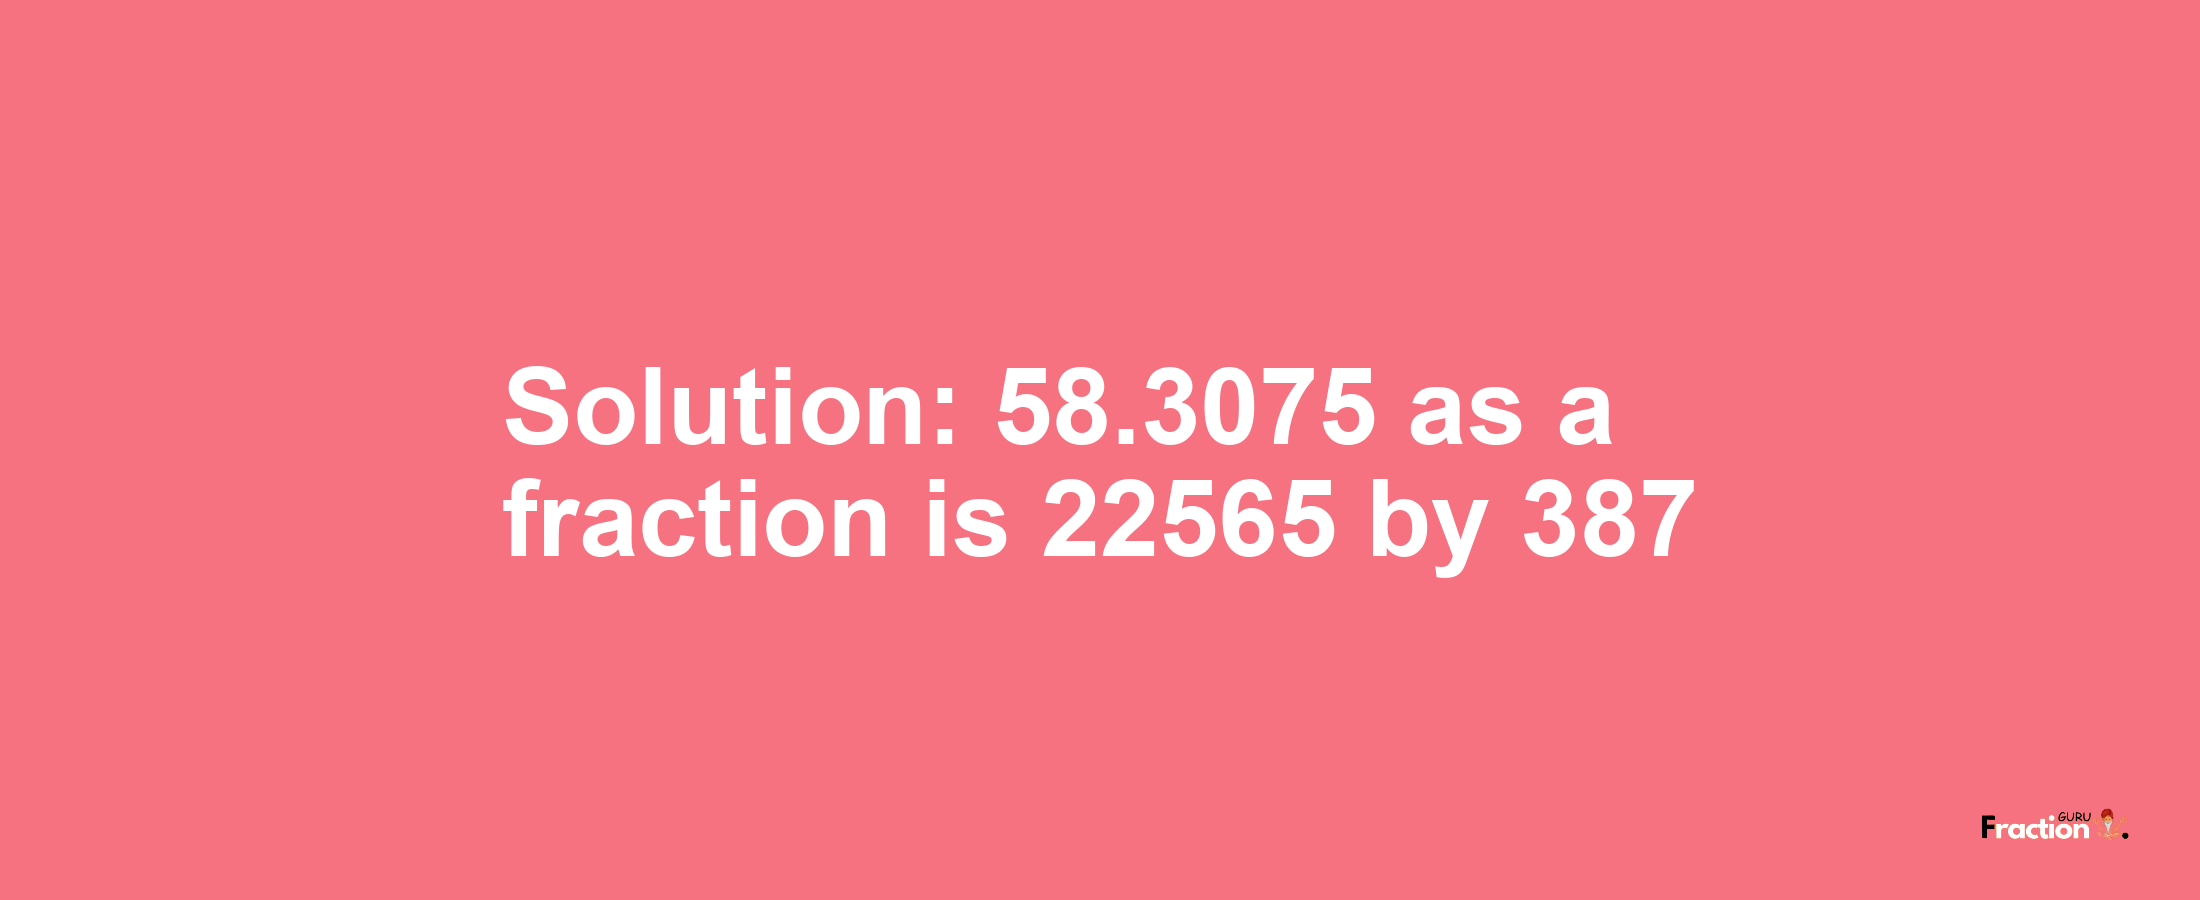 Solution:58.3075 as a fraction is 22565/387